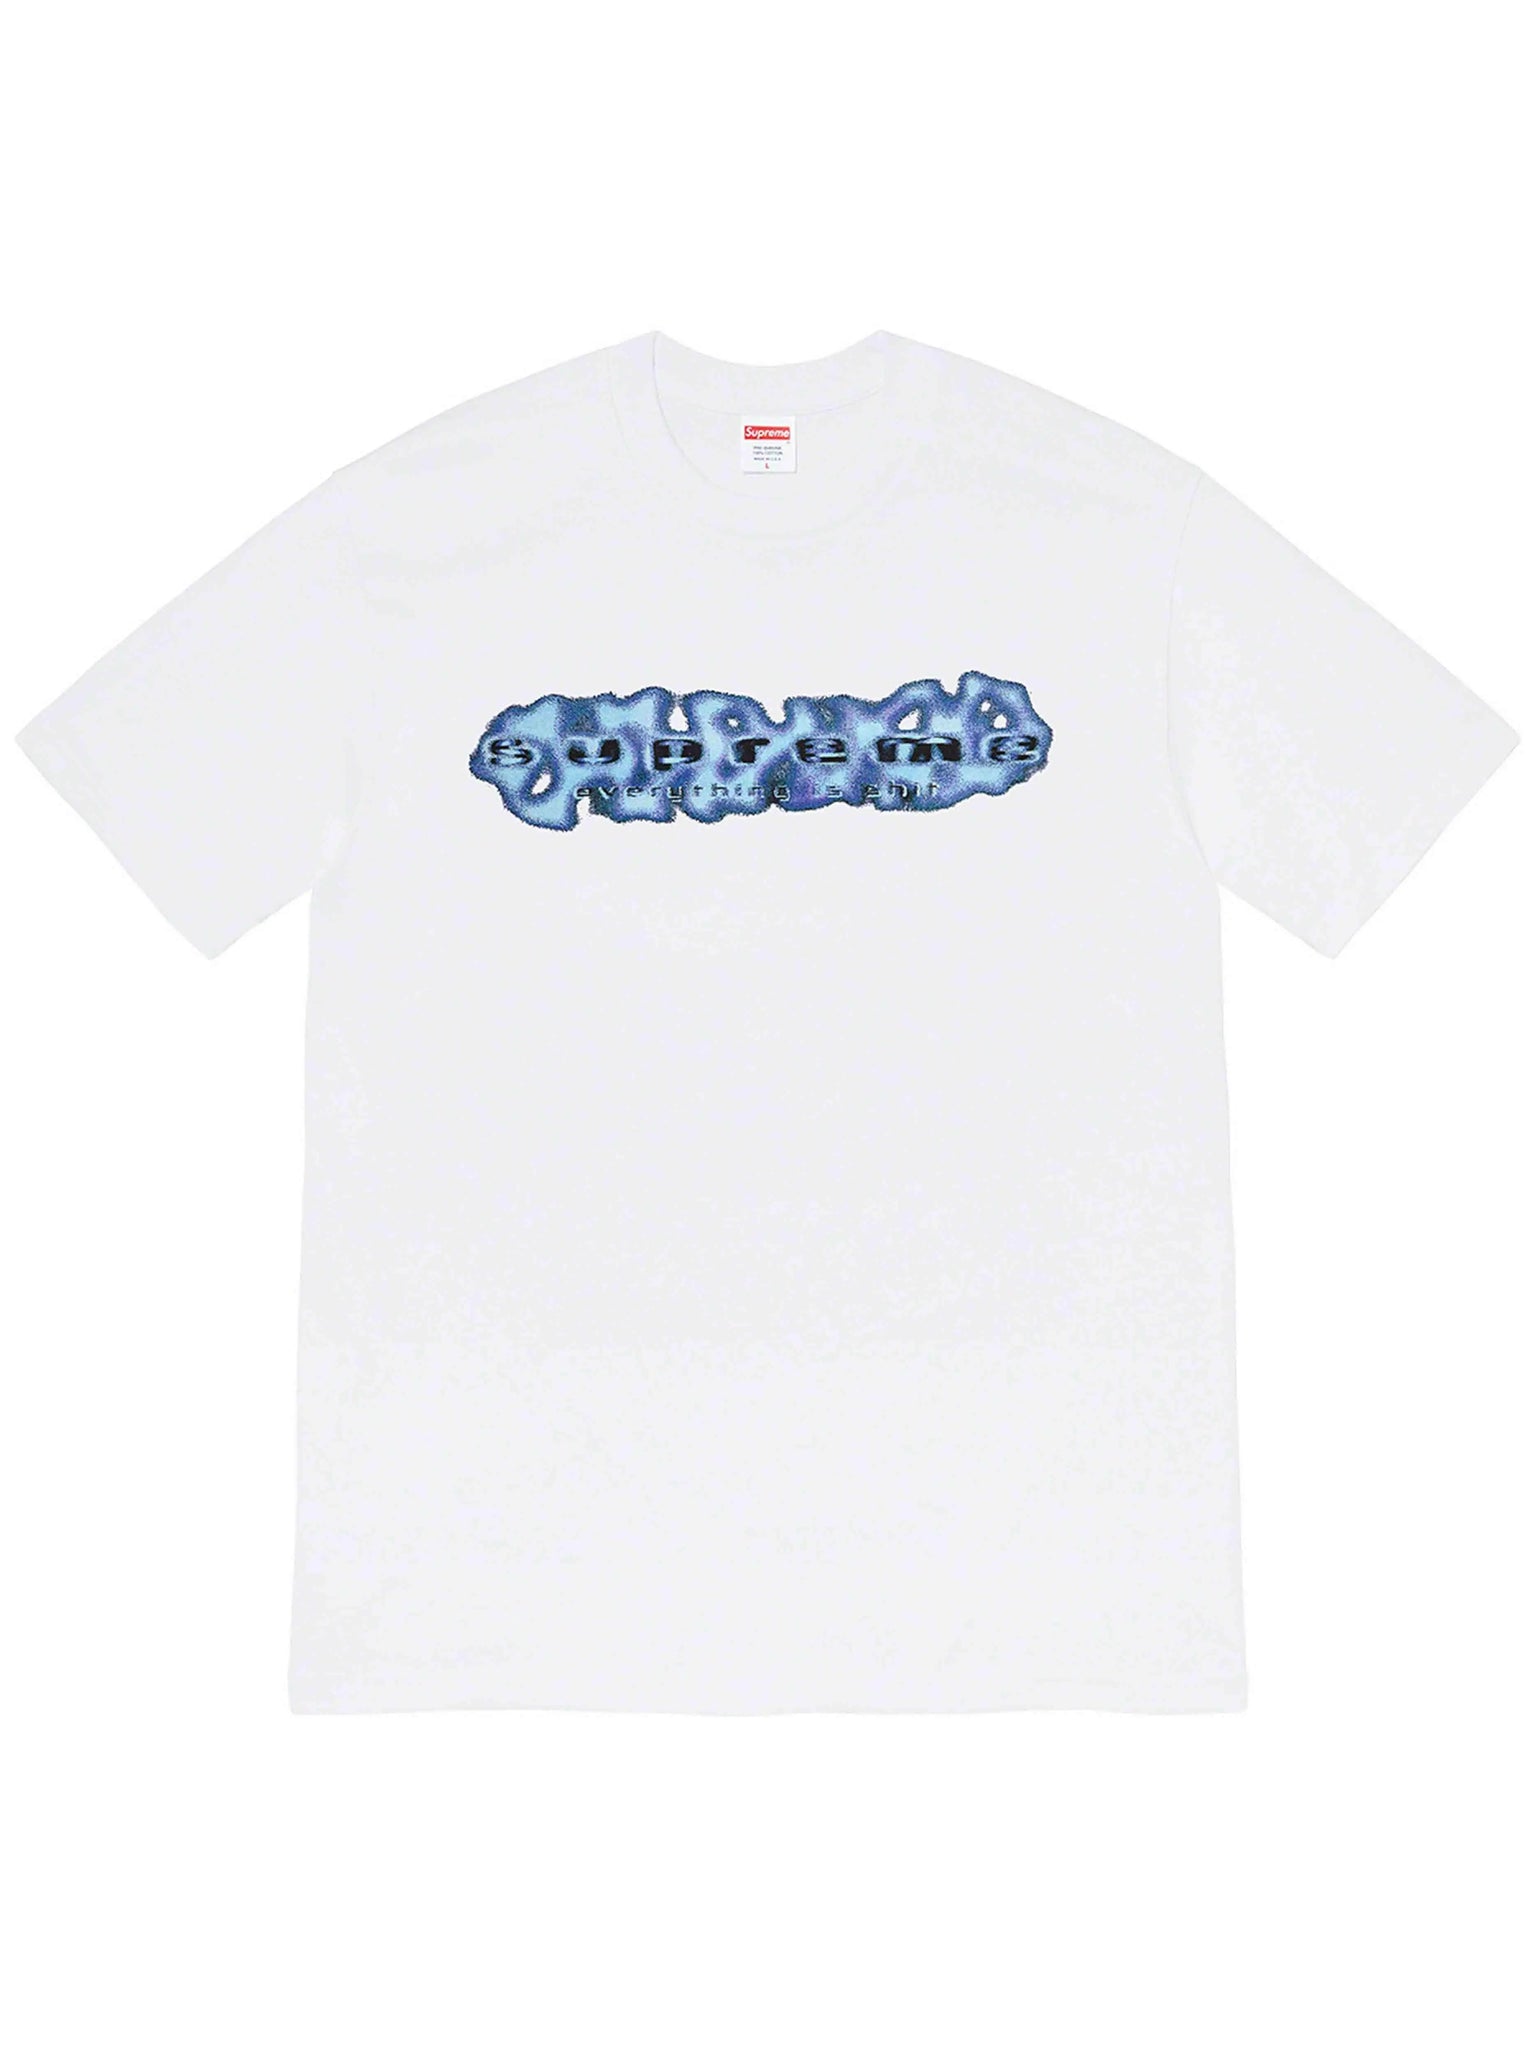 Supreme Everything Is Shit Tee White [SS20] Prior